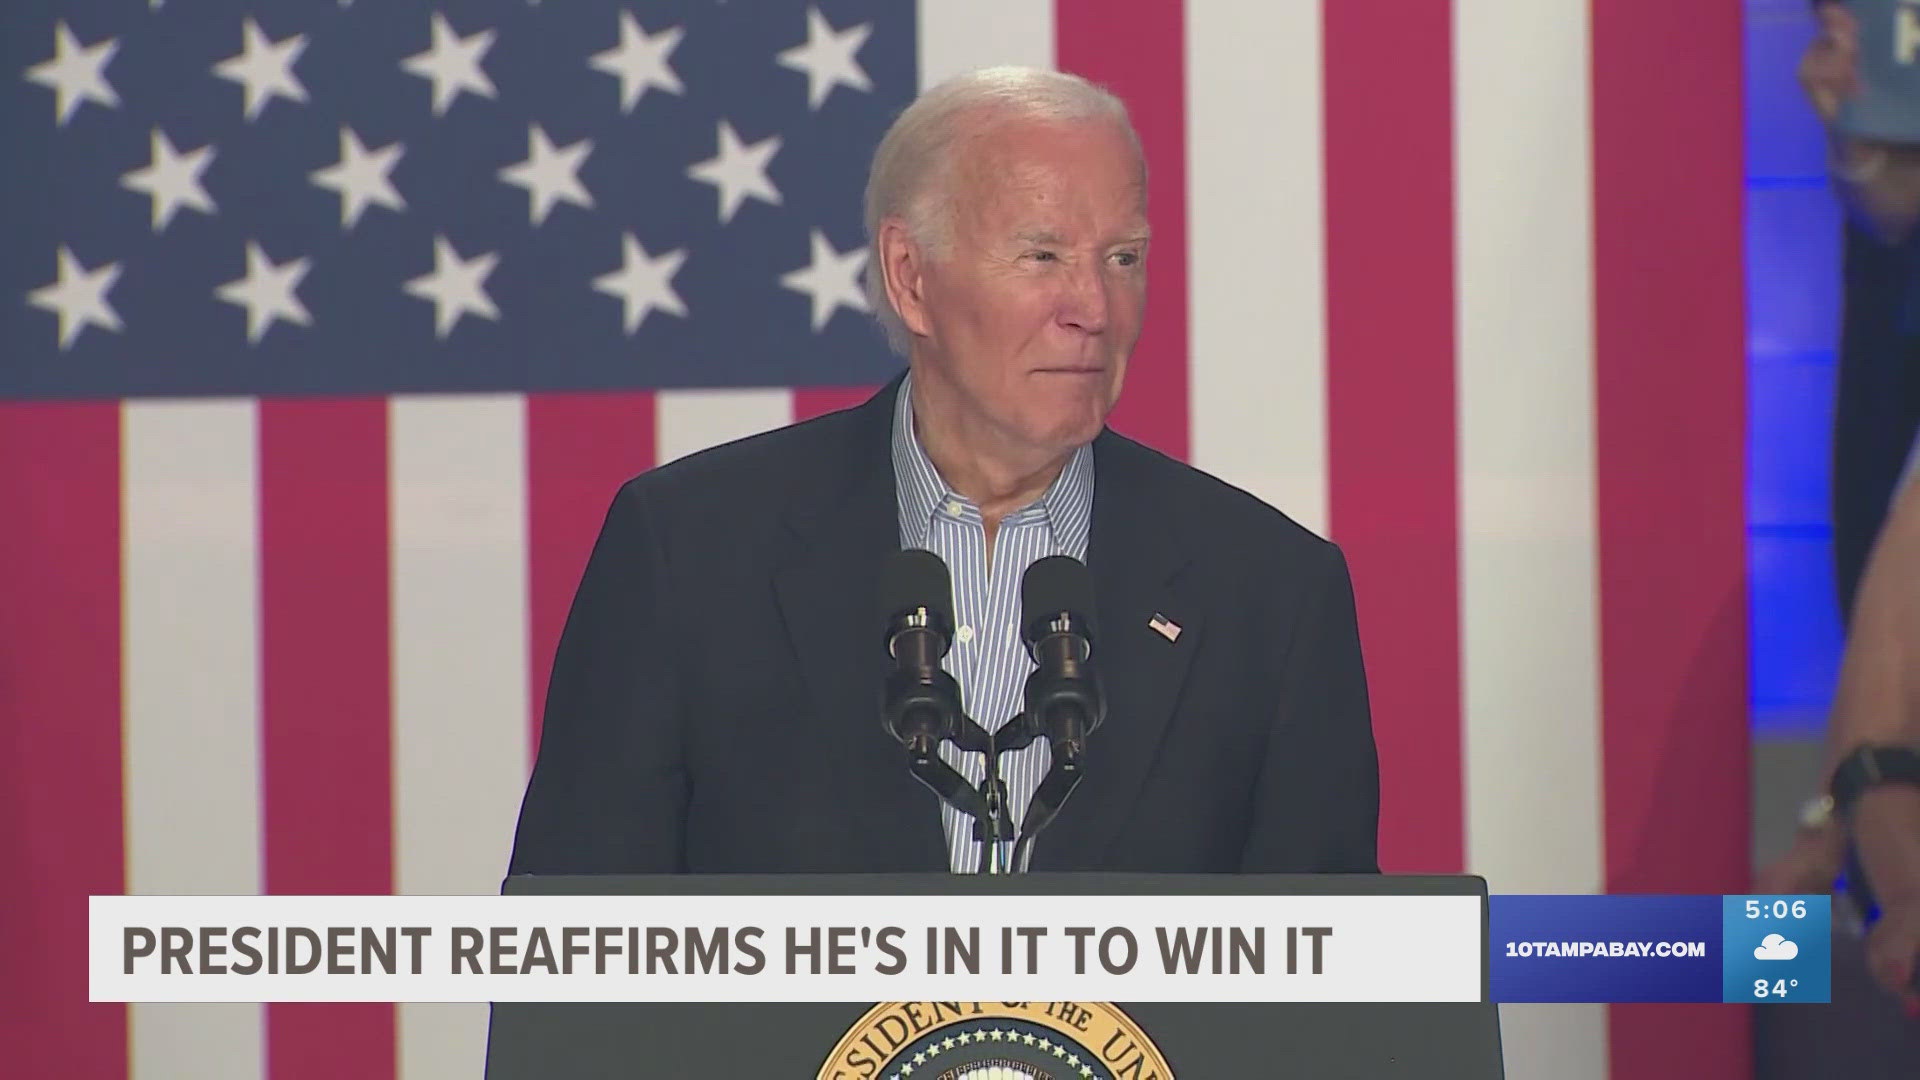 Biden is expected to answer questions tonight during the first live interview since the 2024 debate.